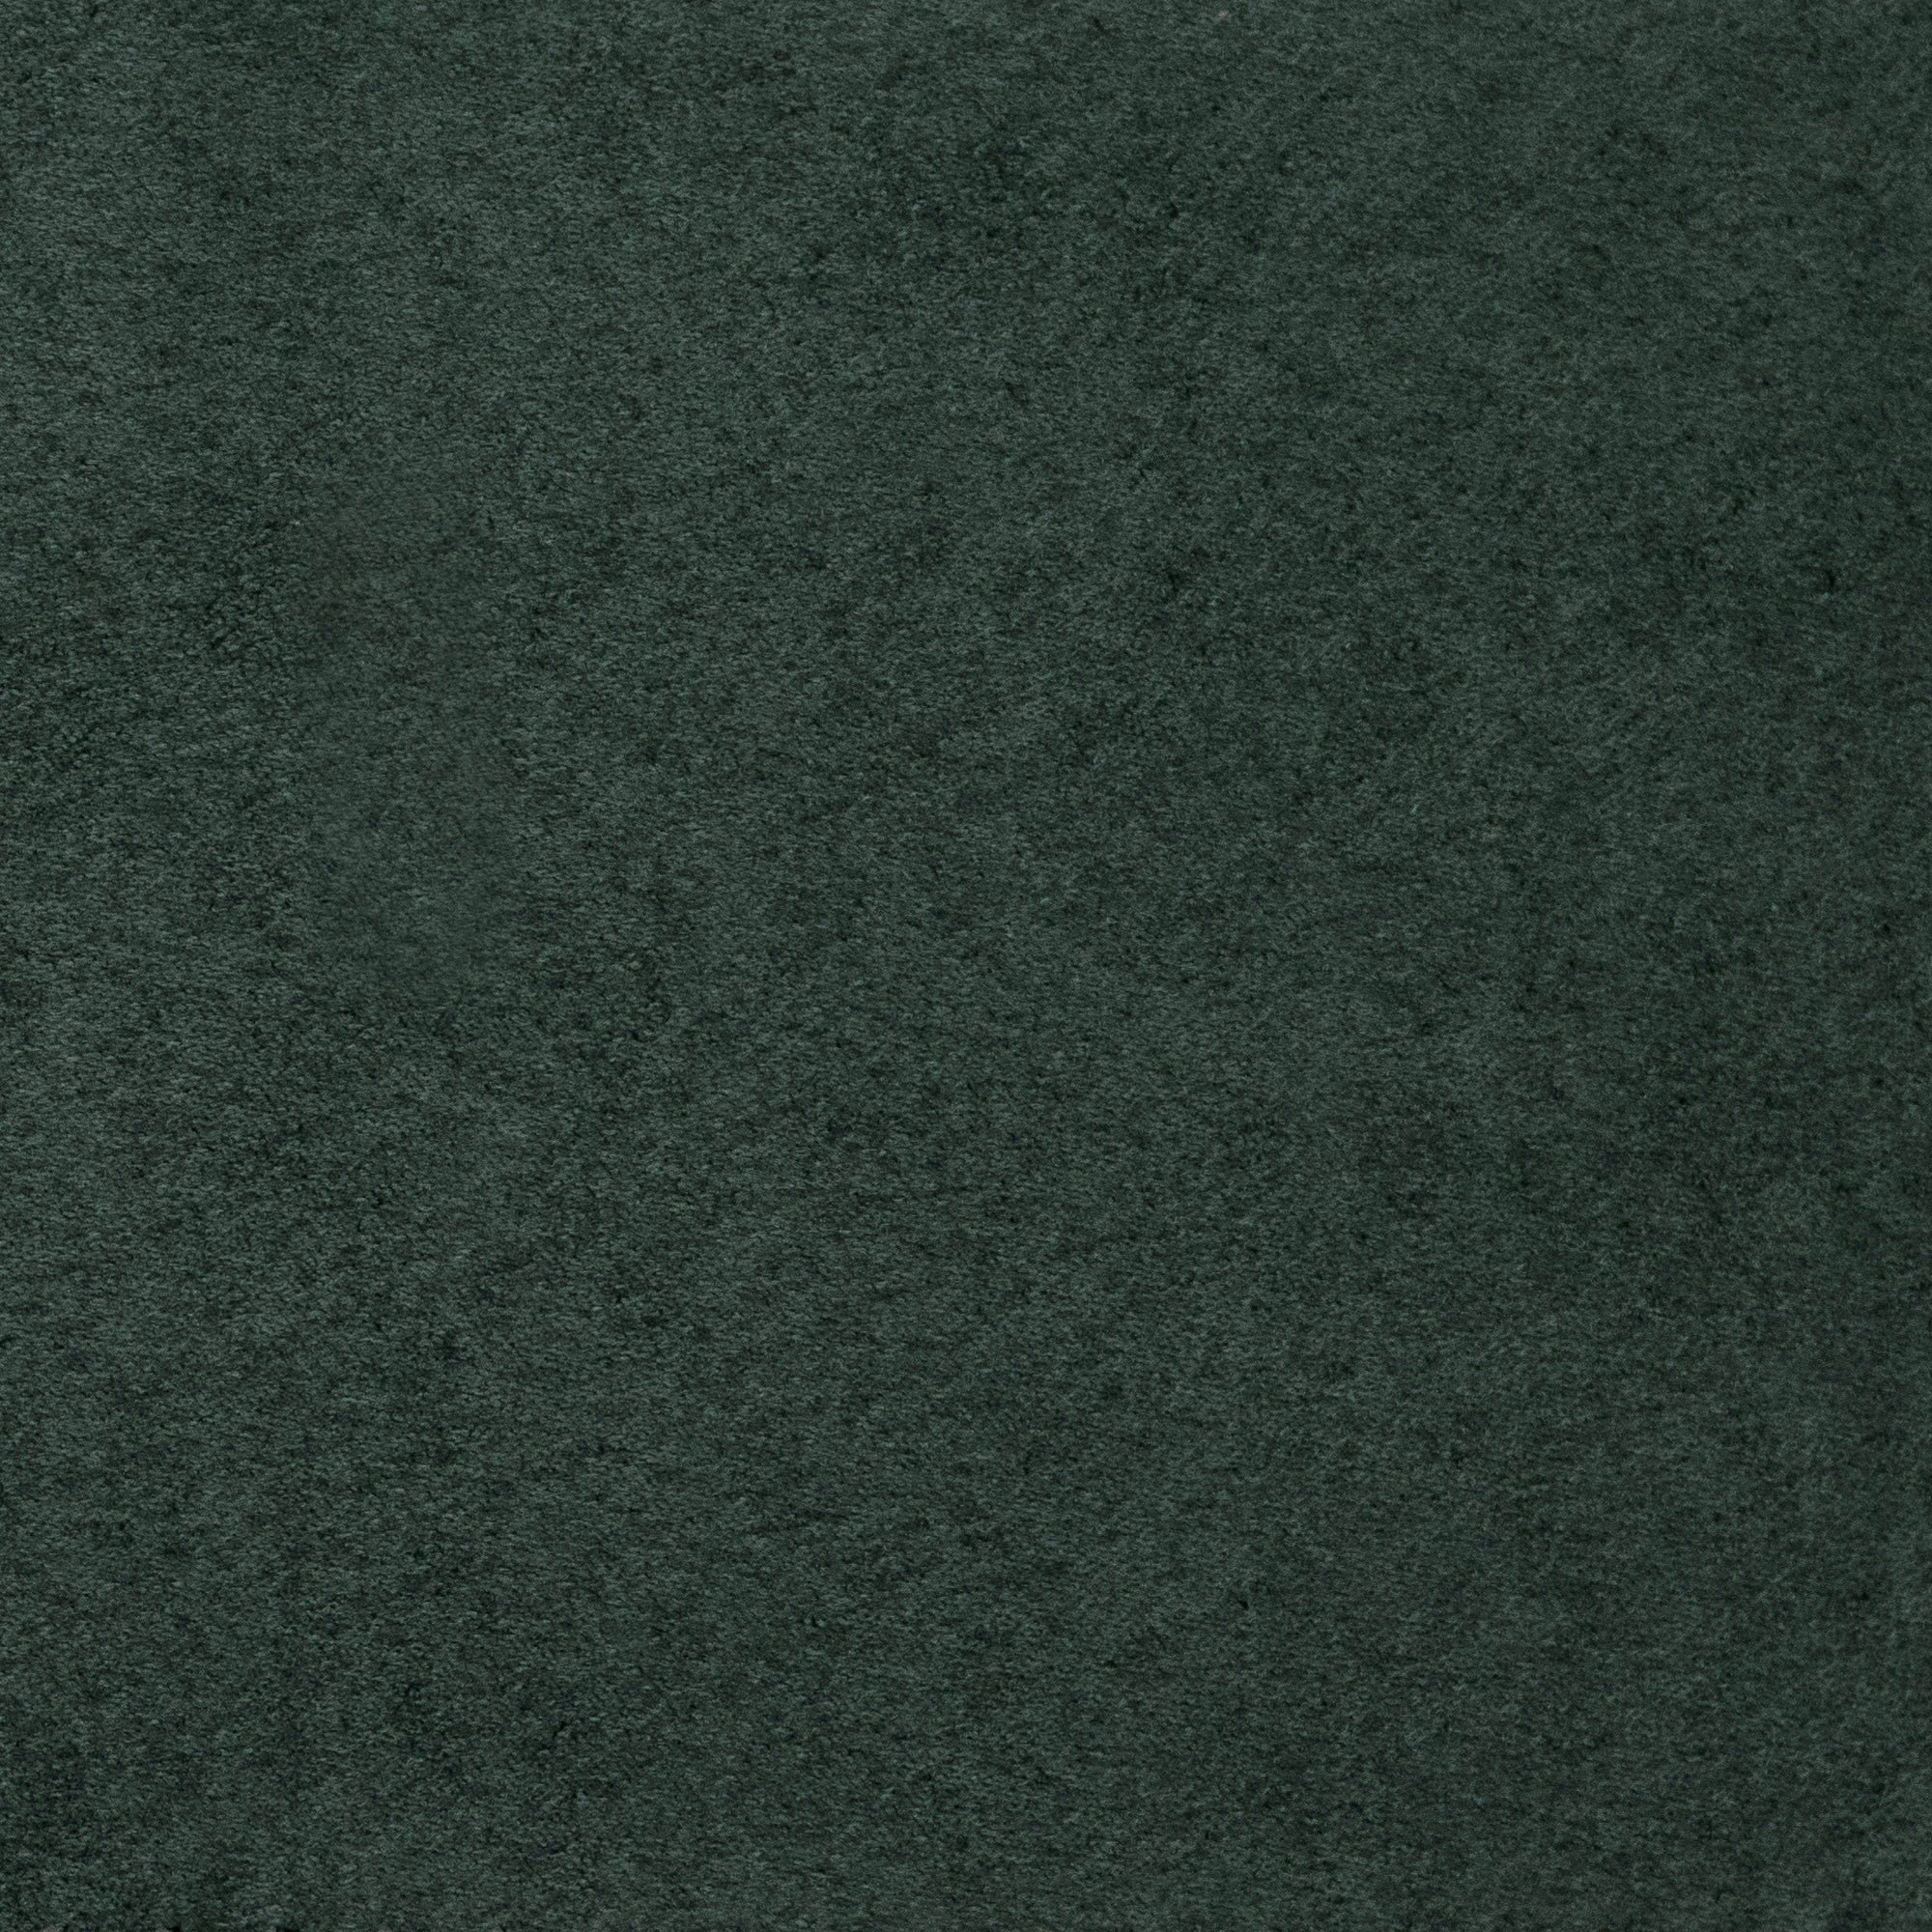 Top Fabric Vintage - Heavy Suede, MicroSuede Upholstery Fabric BT The Yard Buck Skin